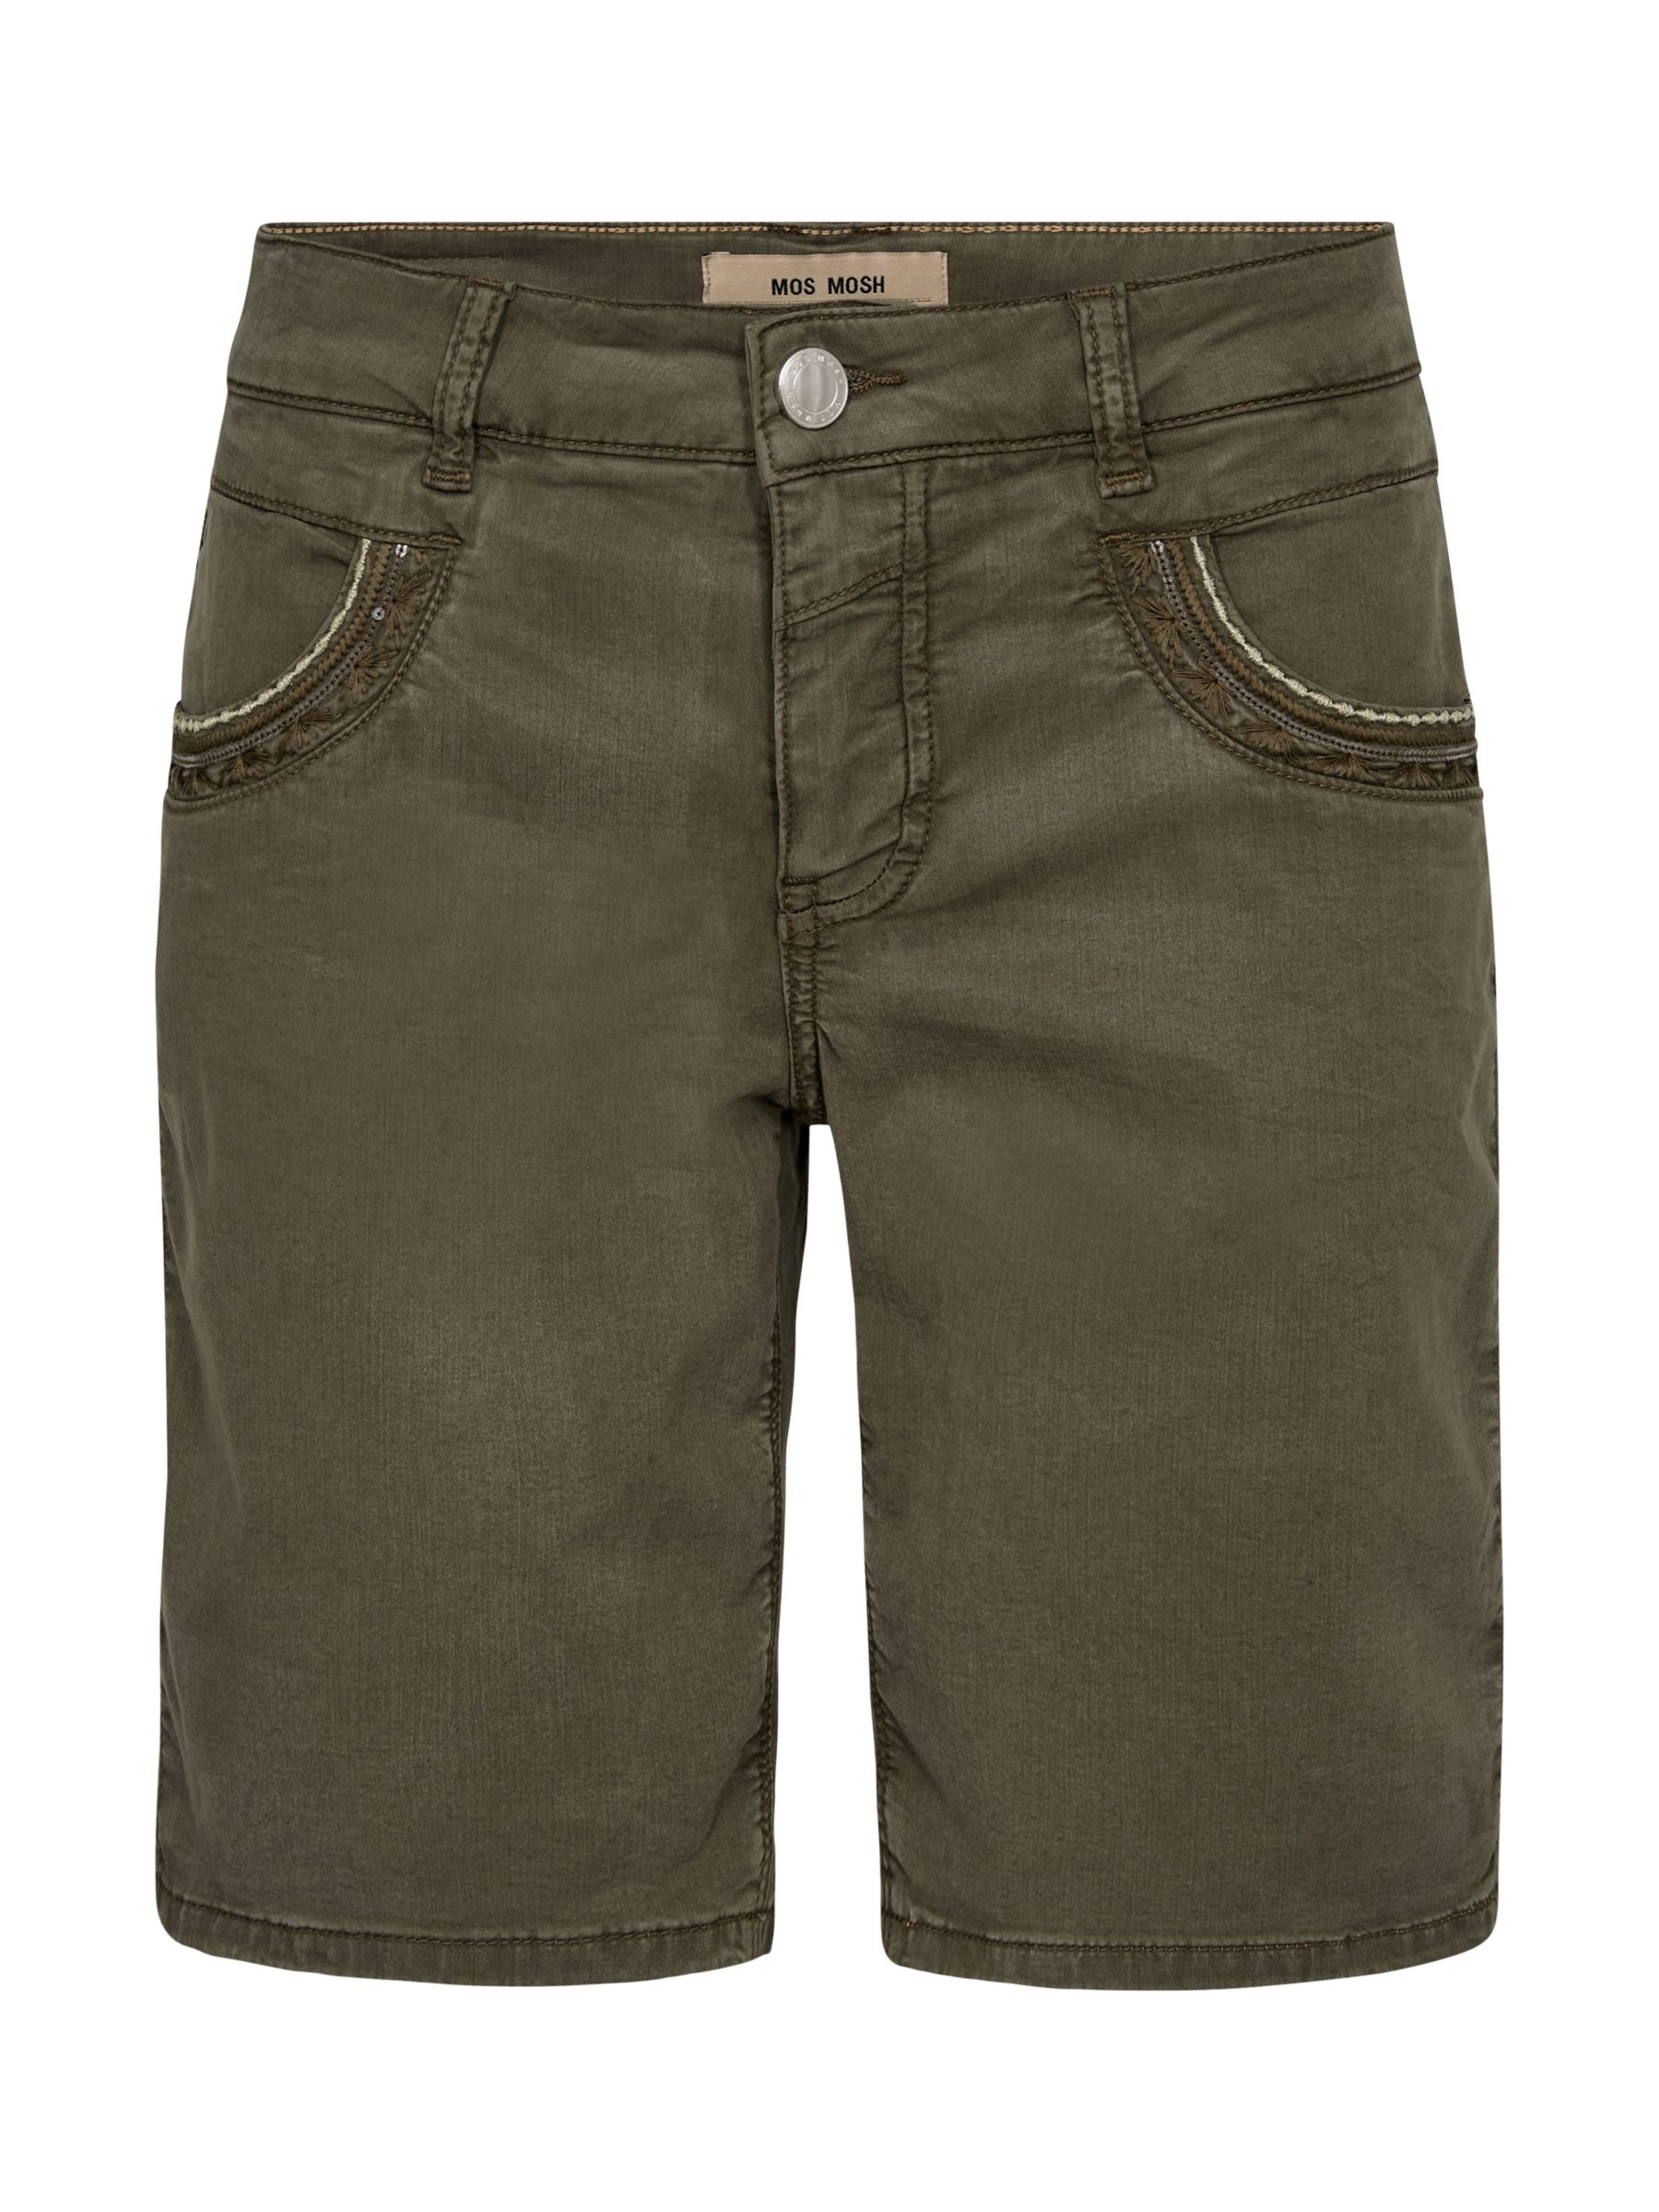 Buy MOS MOSH Naomi Treasure Embroidered Shorts, Dusty Olive Online at johnlewis.com